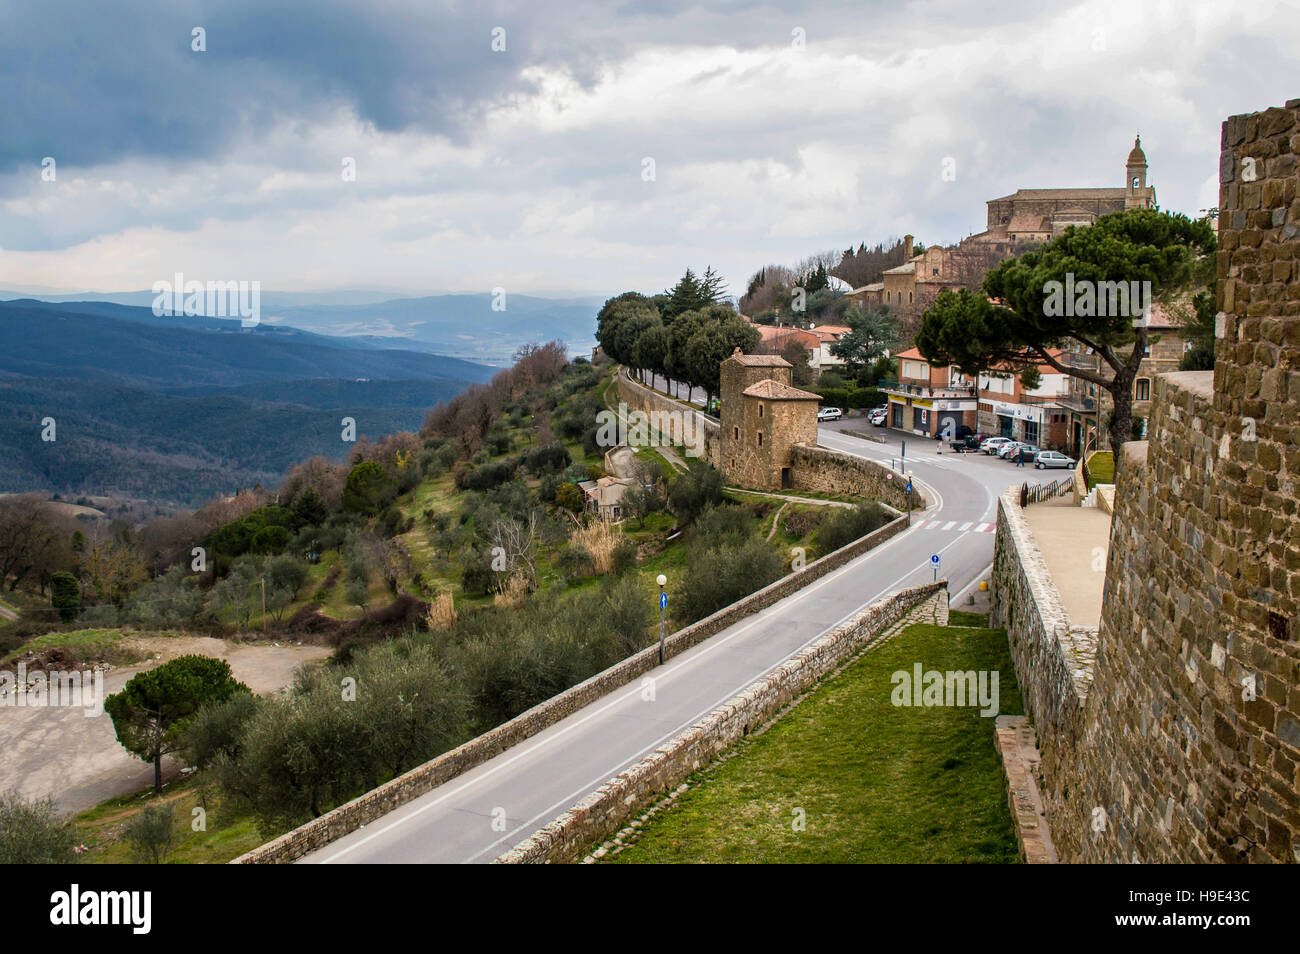 Edge of the residential district of Montalcino, town famous for its wine Brunello in the province of Siena. Stock Photo